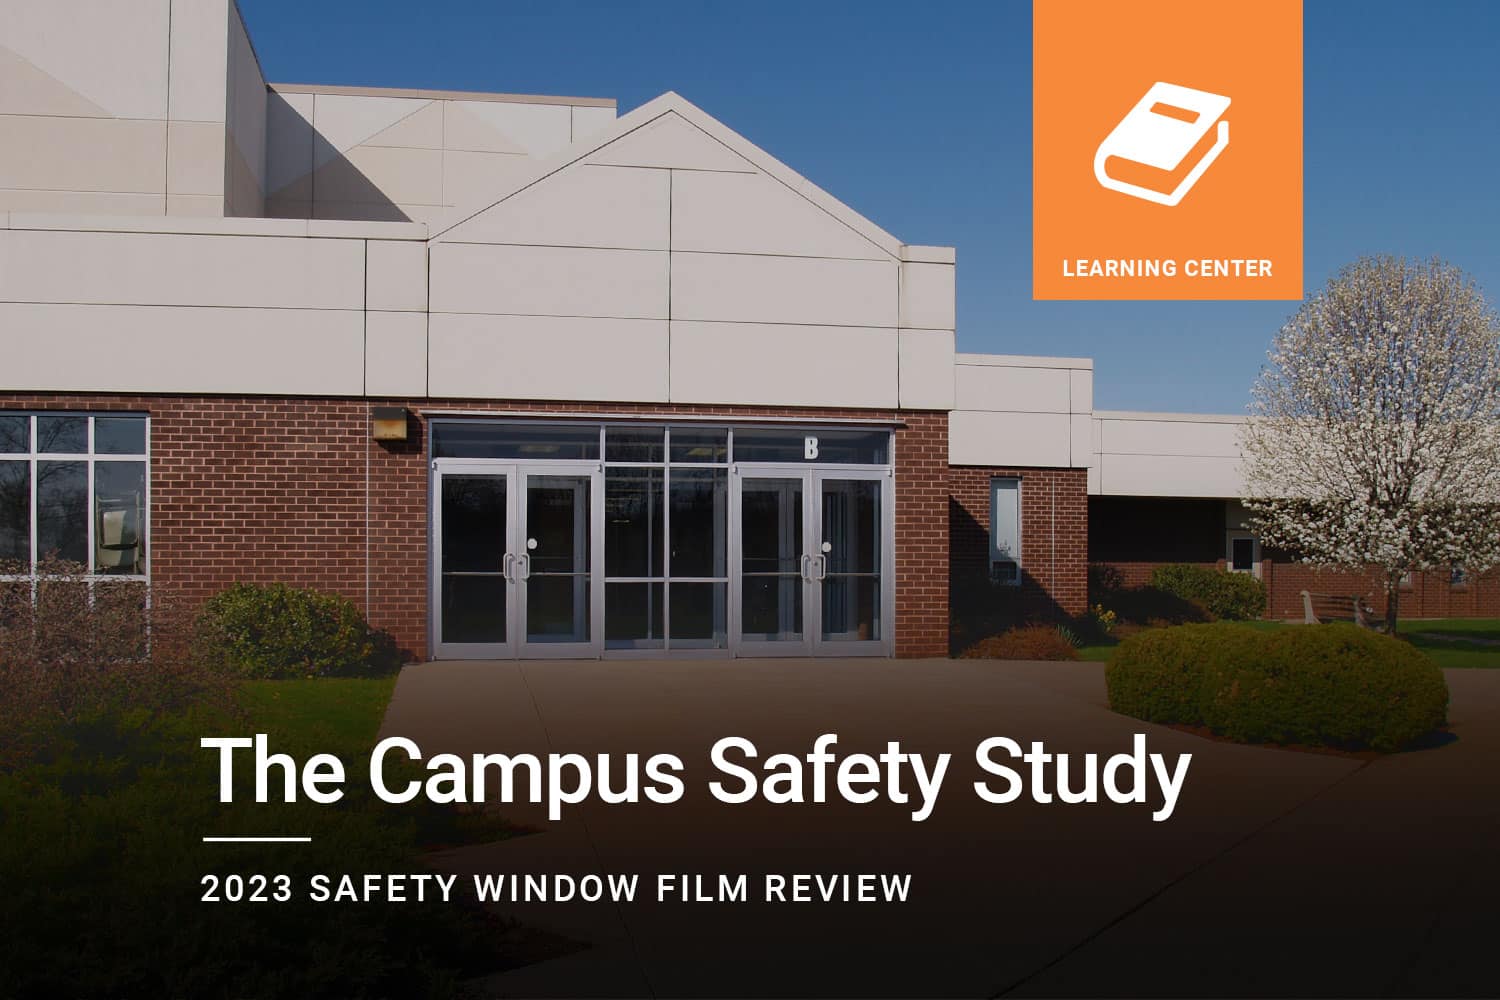 The Campus Safety Study and Safety Window Film Review